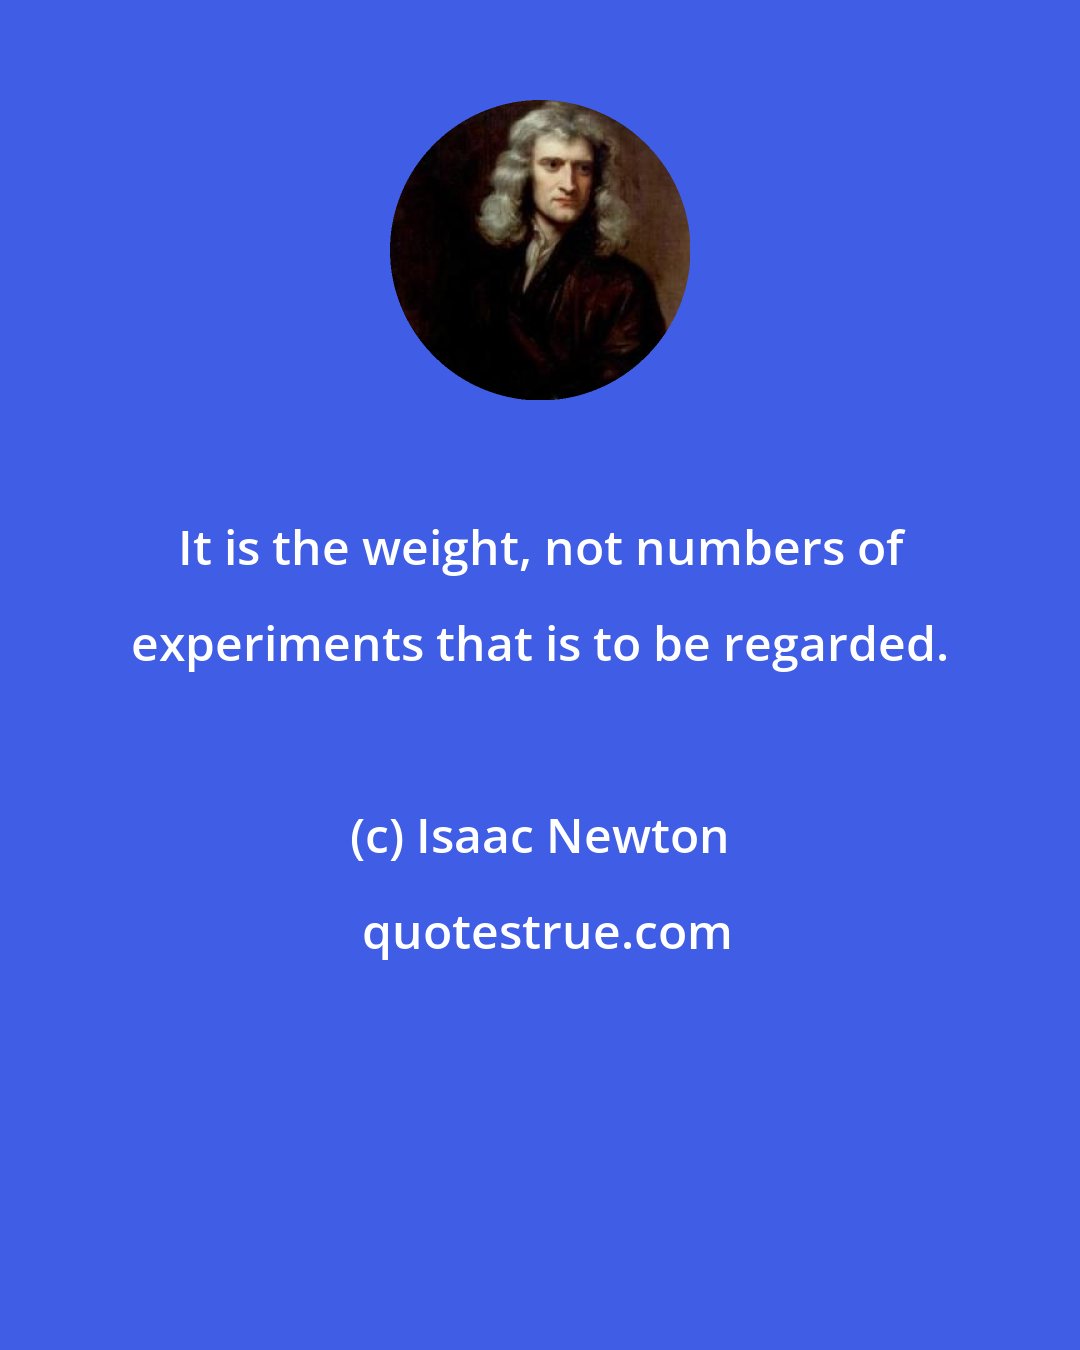 Isaac Newton: It is the weight, not numbers of experiments that is to be regarded.